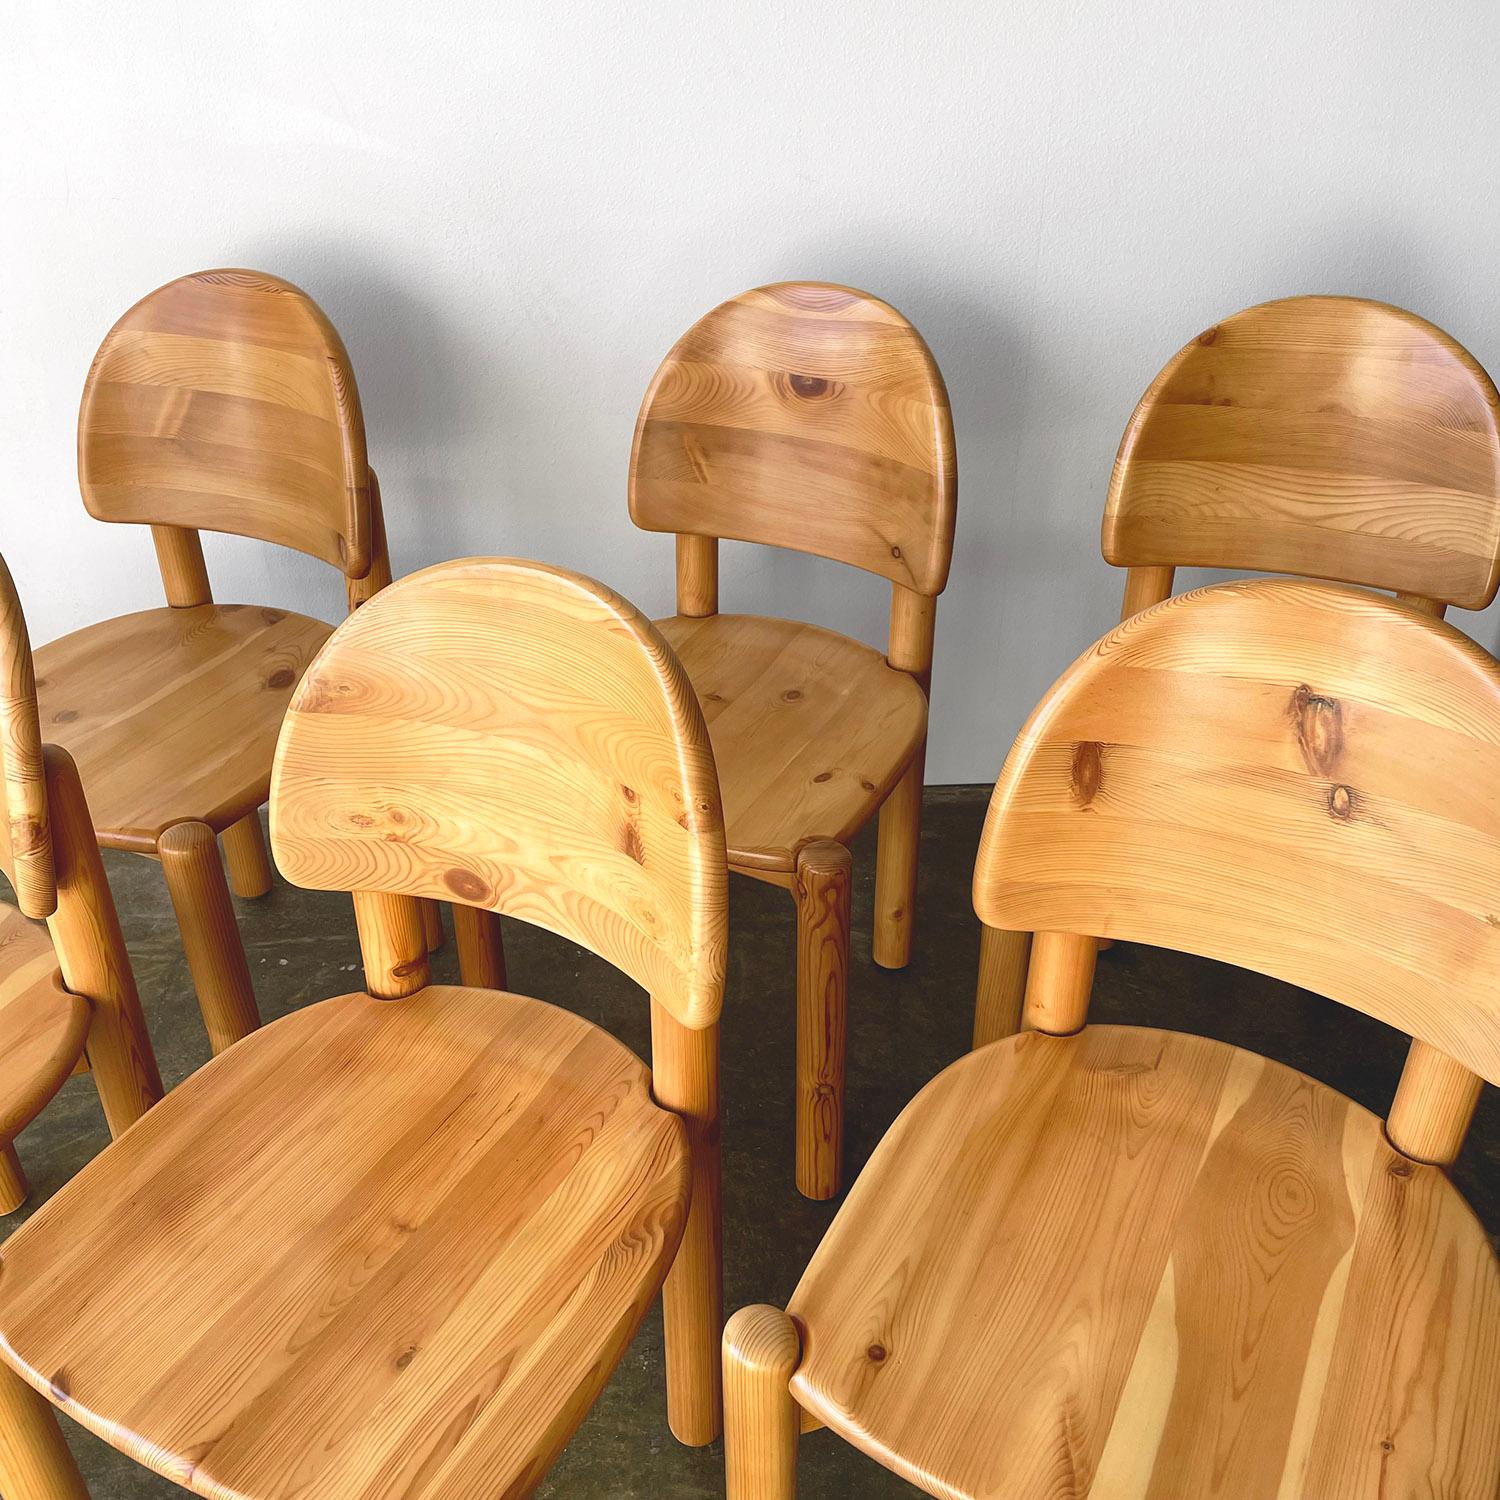 Rainer Daumiller set of 6 dining chairs
Manufactured by Hirtshals Savvaerk
Denmark, circa 1970’s
Remarkable Scandinavian woodwork
Solid pine wood chairs with minor imperfections
Beautiful wood grain
Carved seat and backrest which give them a